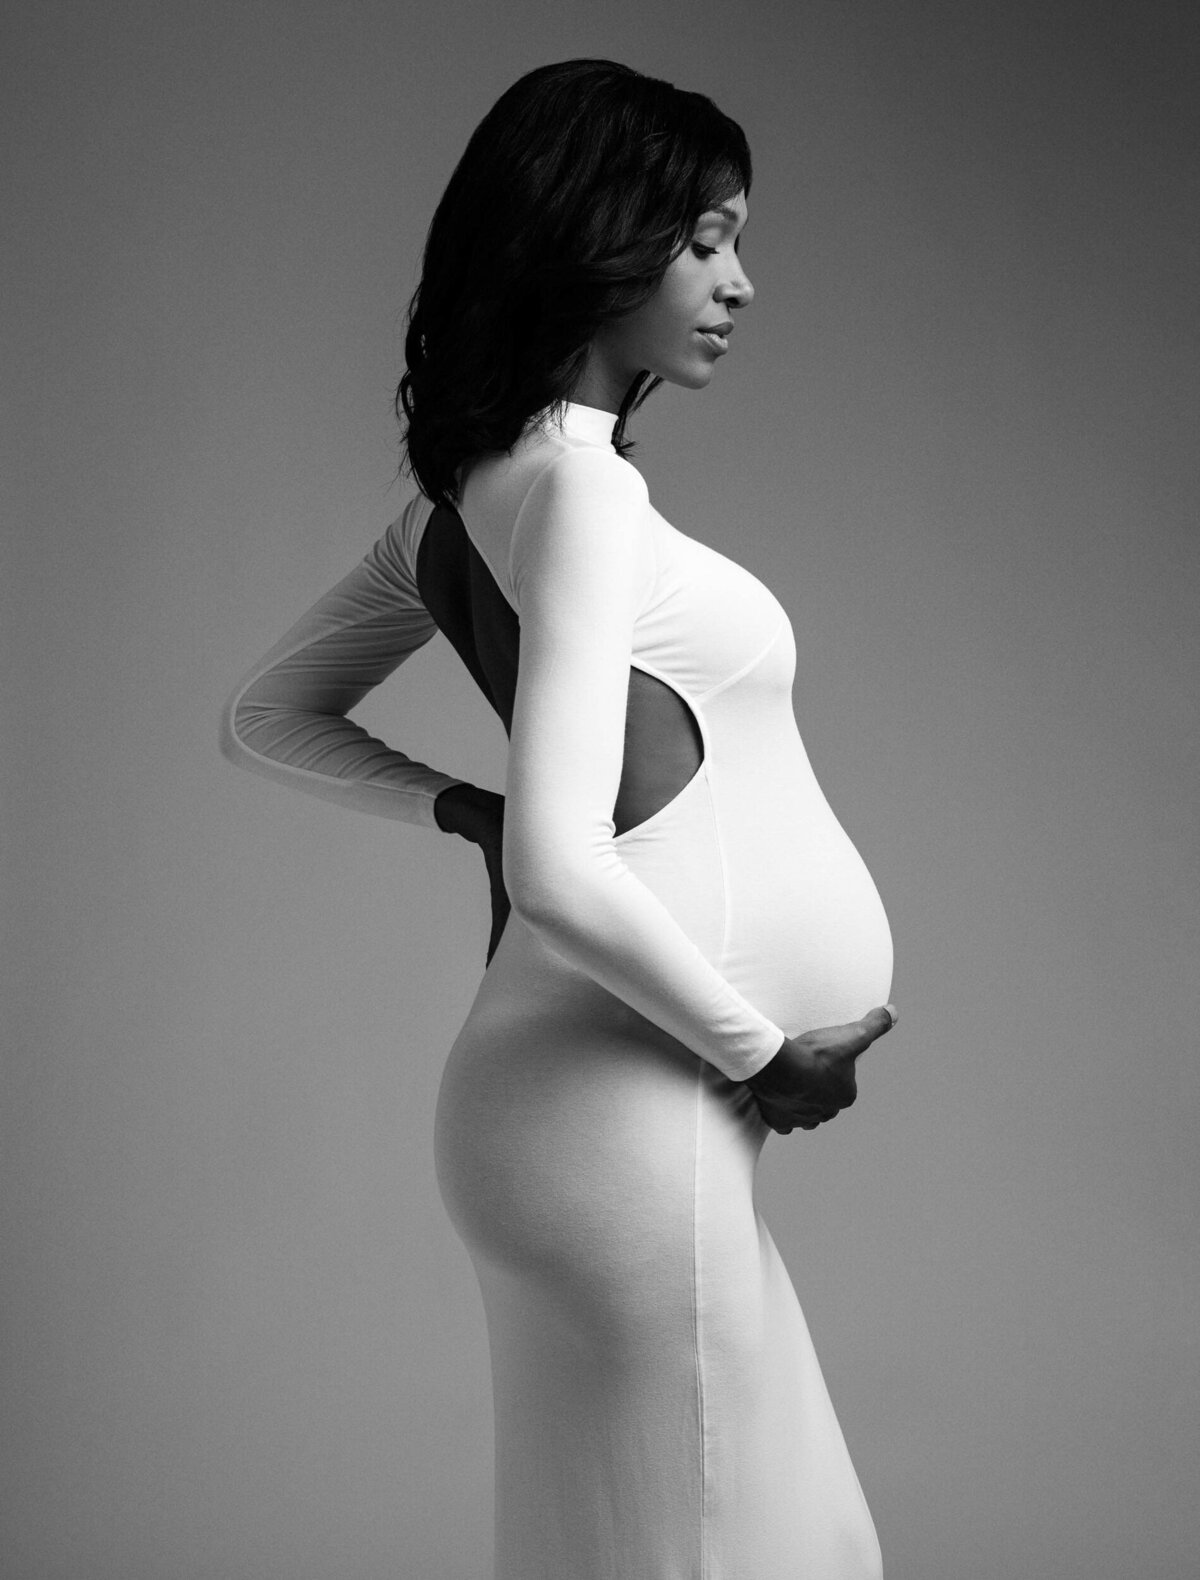 Artistic Lighting for Maternity Photography Course by Lola Melani-1